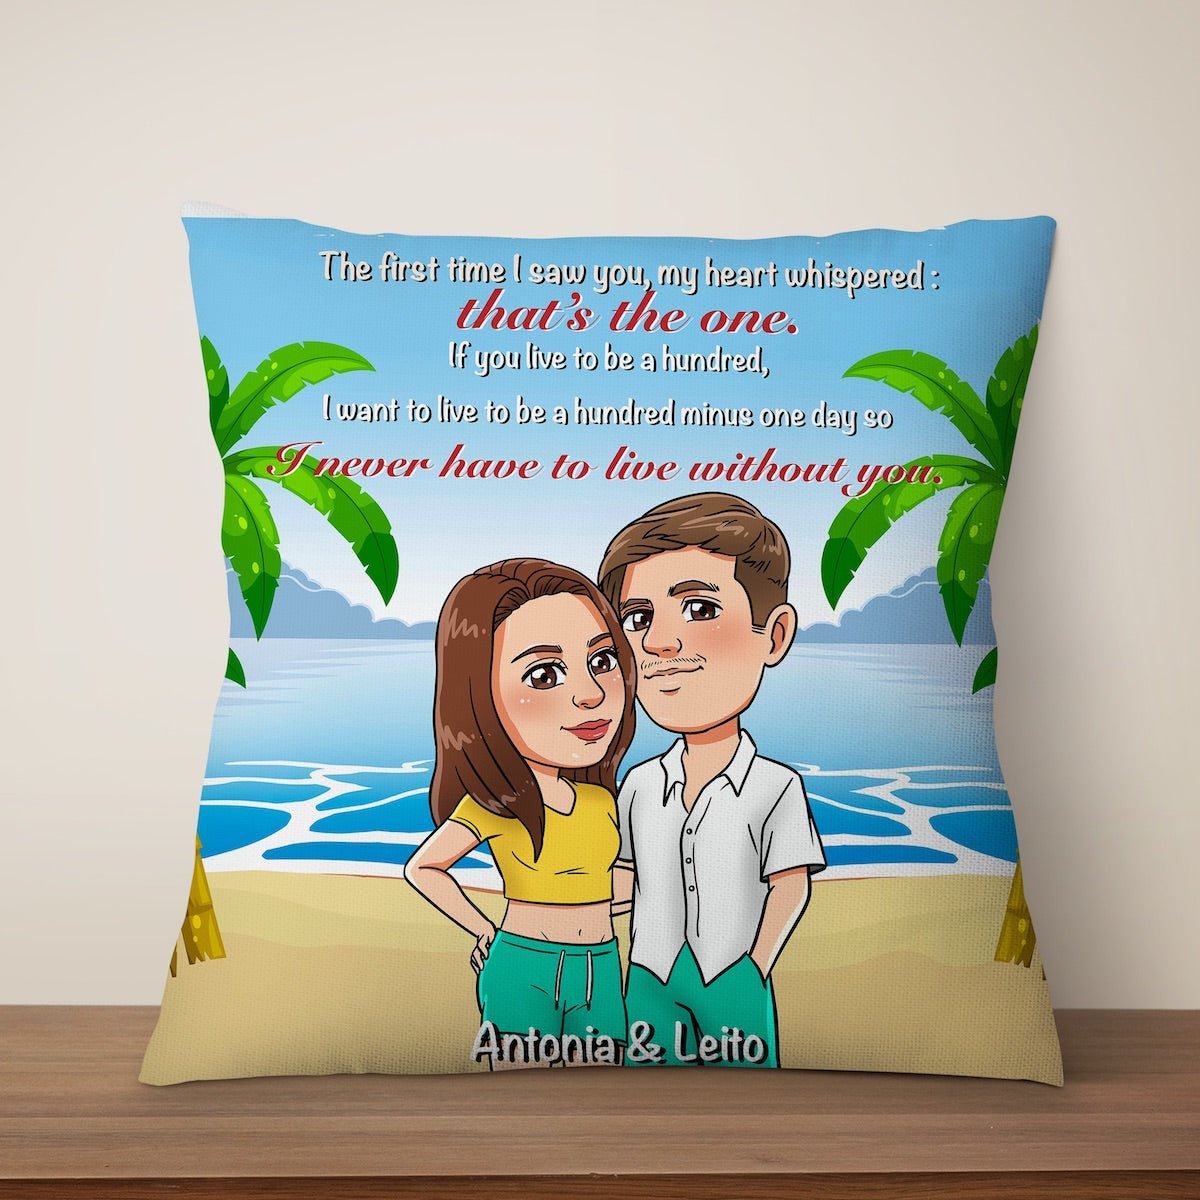 The first day i saw you my heart whispered that's the one- Couple Gift - Personalized Custom Pillow - Fabiano - Makeof.me